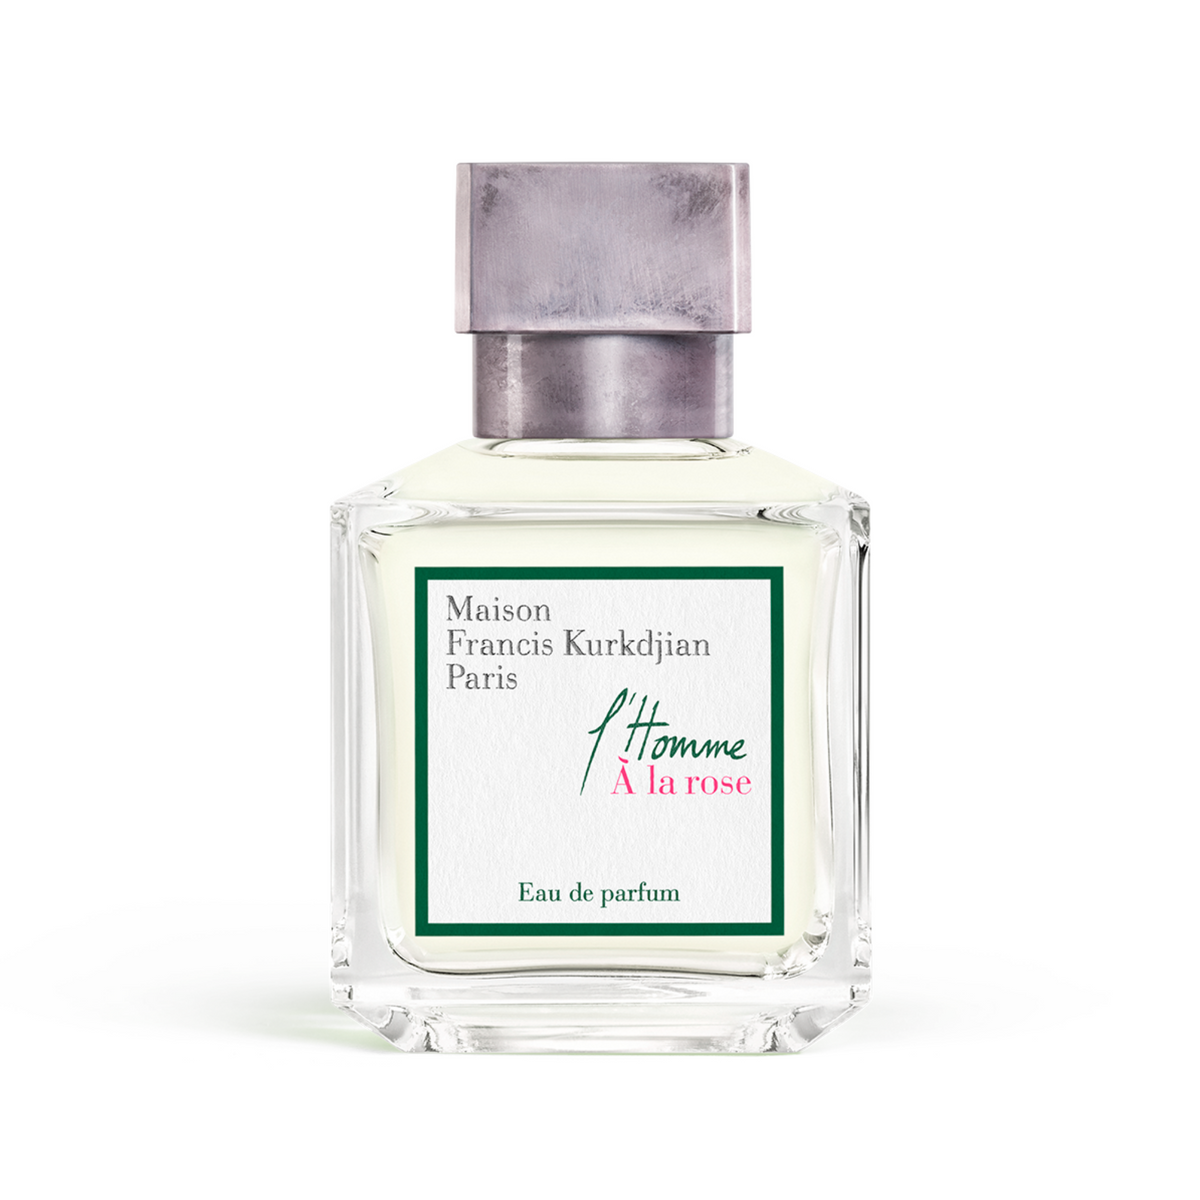 Primary image of L'Homme A La Rose EDP